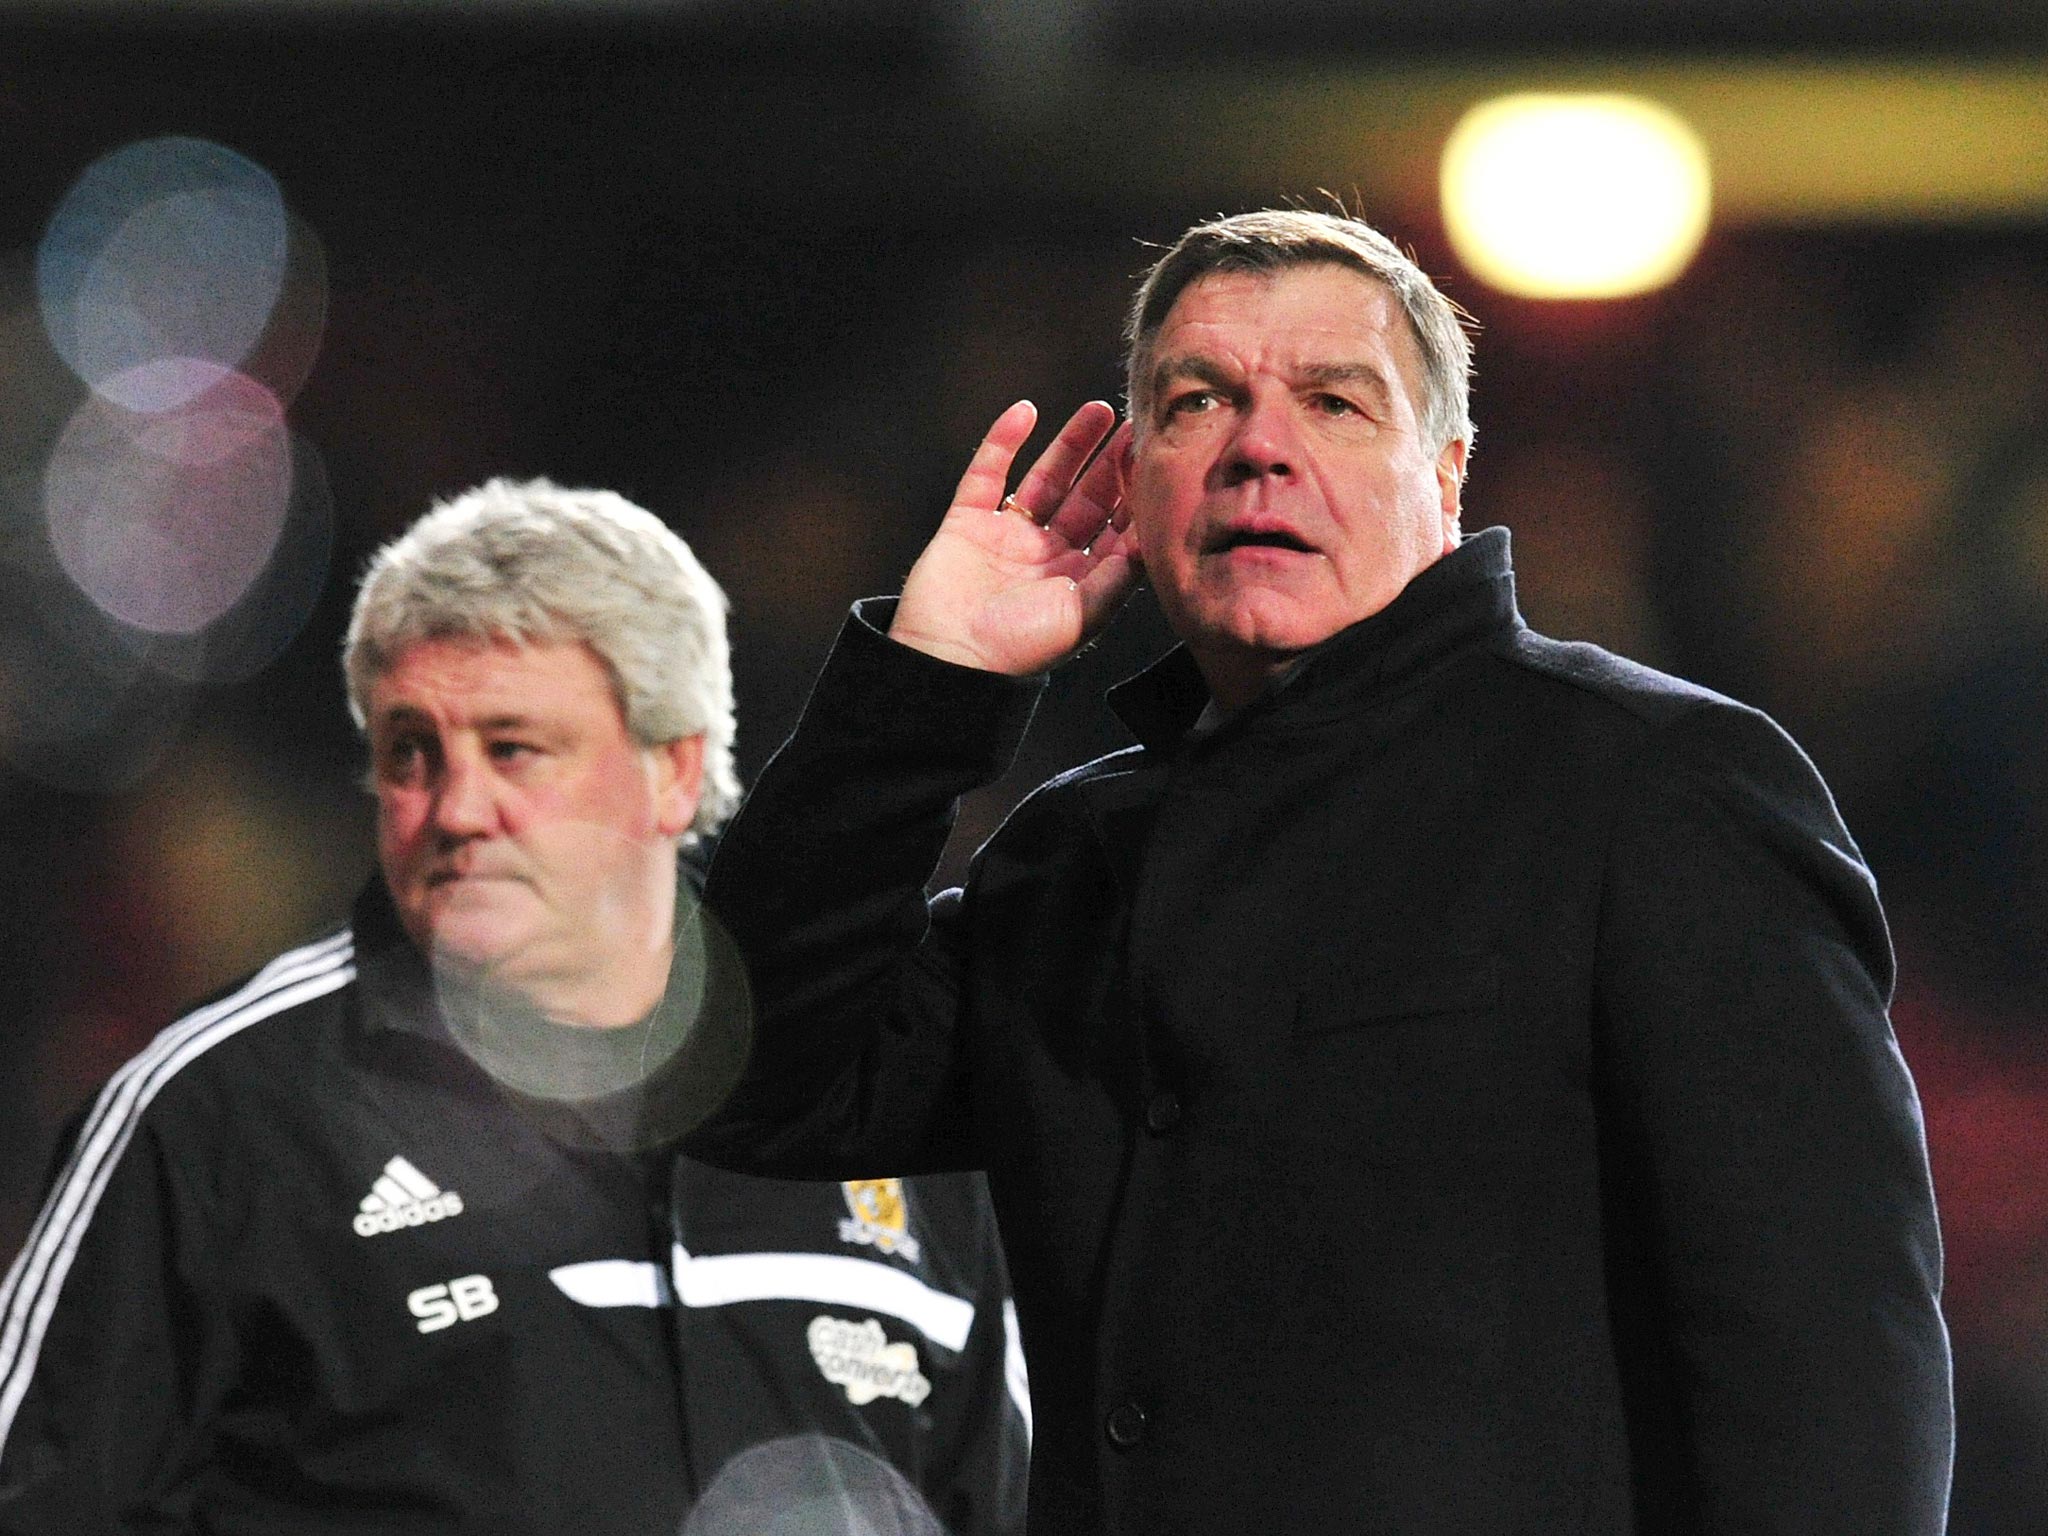 Sam Allardyce responds to West ham fans booing at the final whistle of their 2-1 victory over Hull